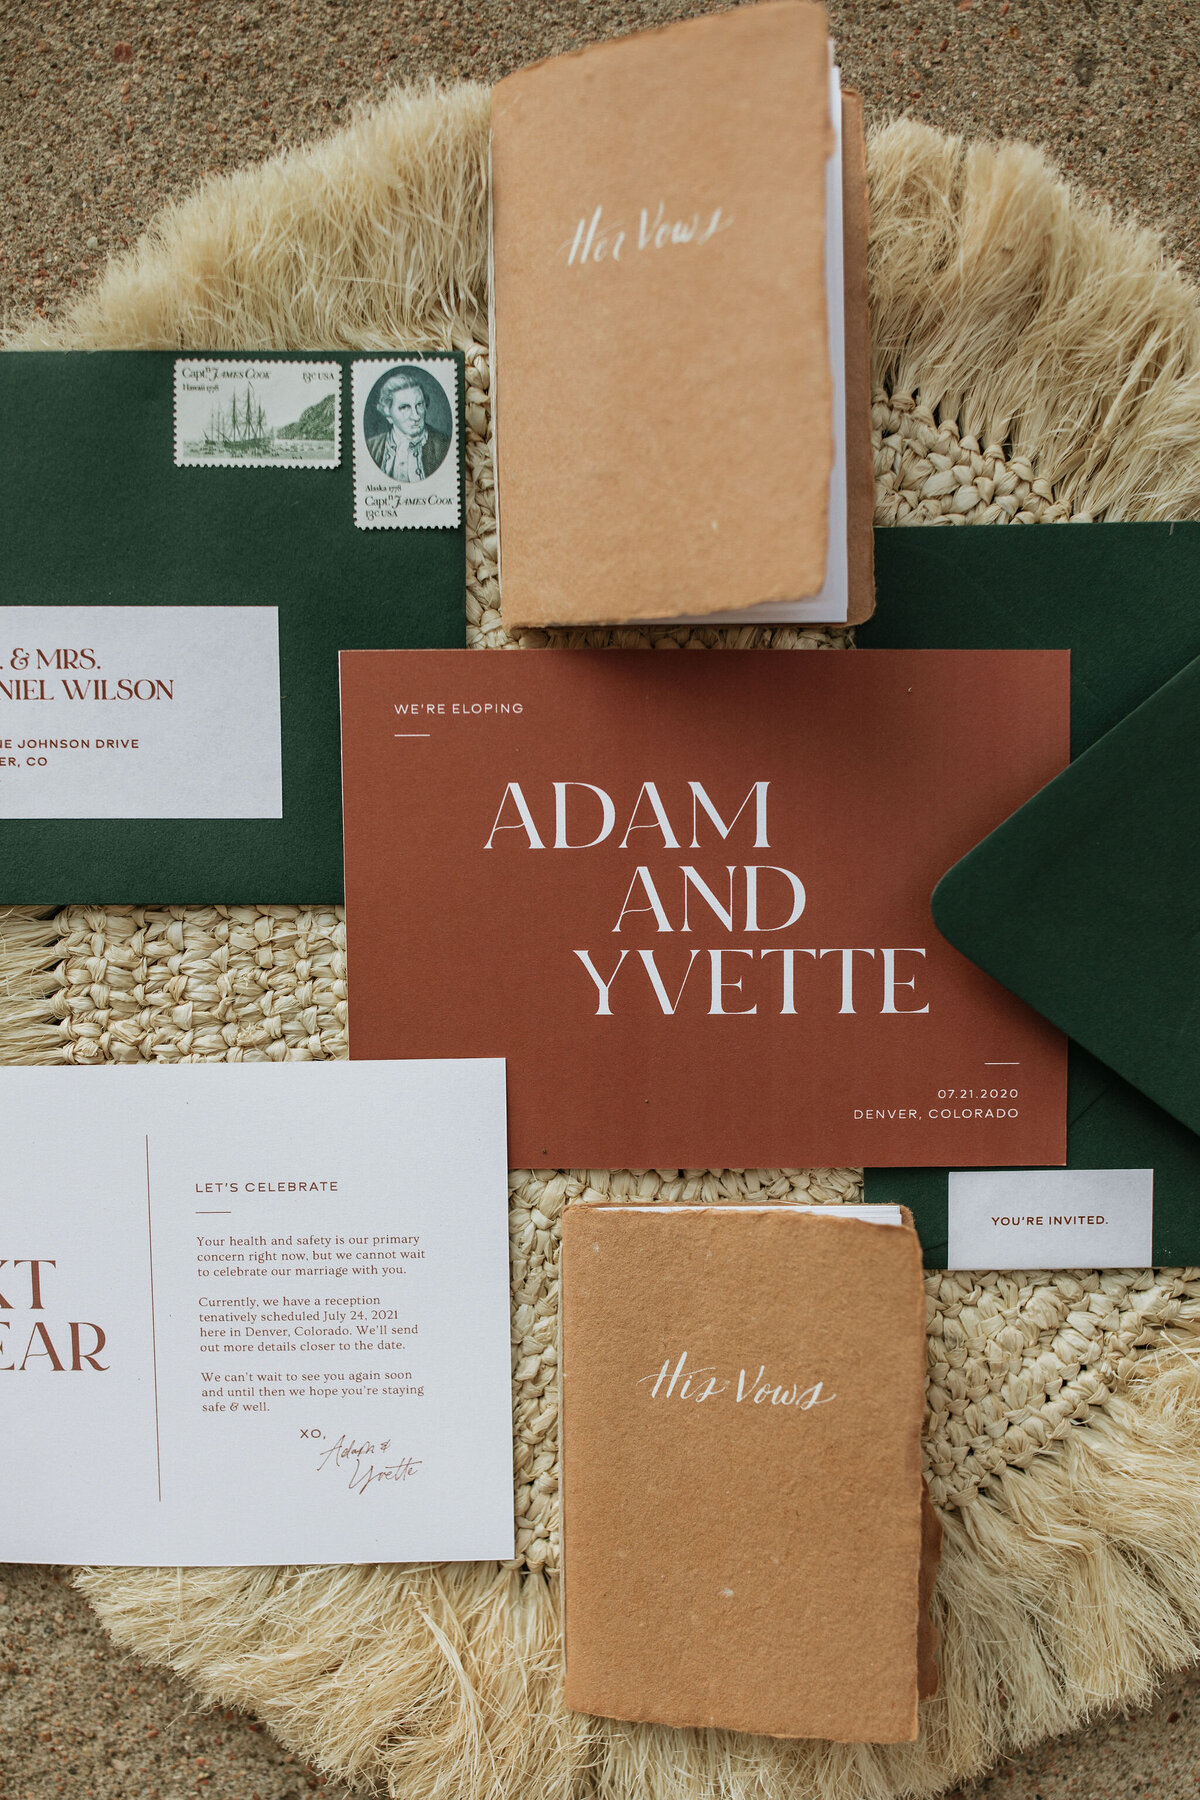 mustard textured booklets with white cursive lettering next to dark green envelopes and white card stock save the date with bronze lettering